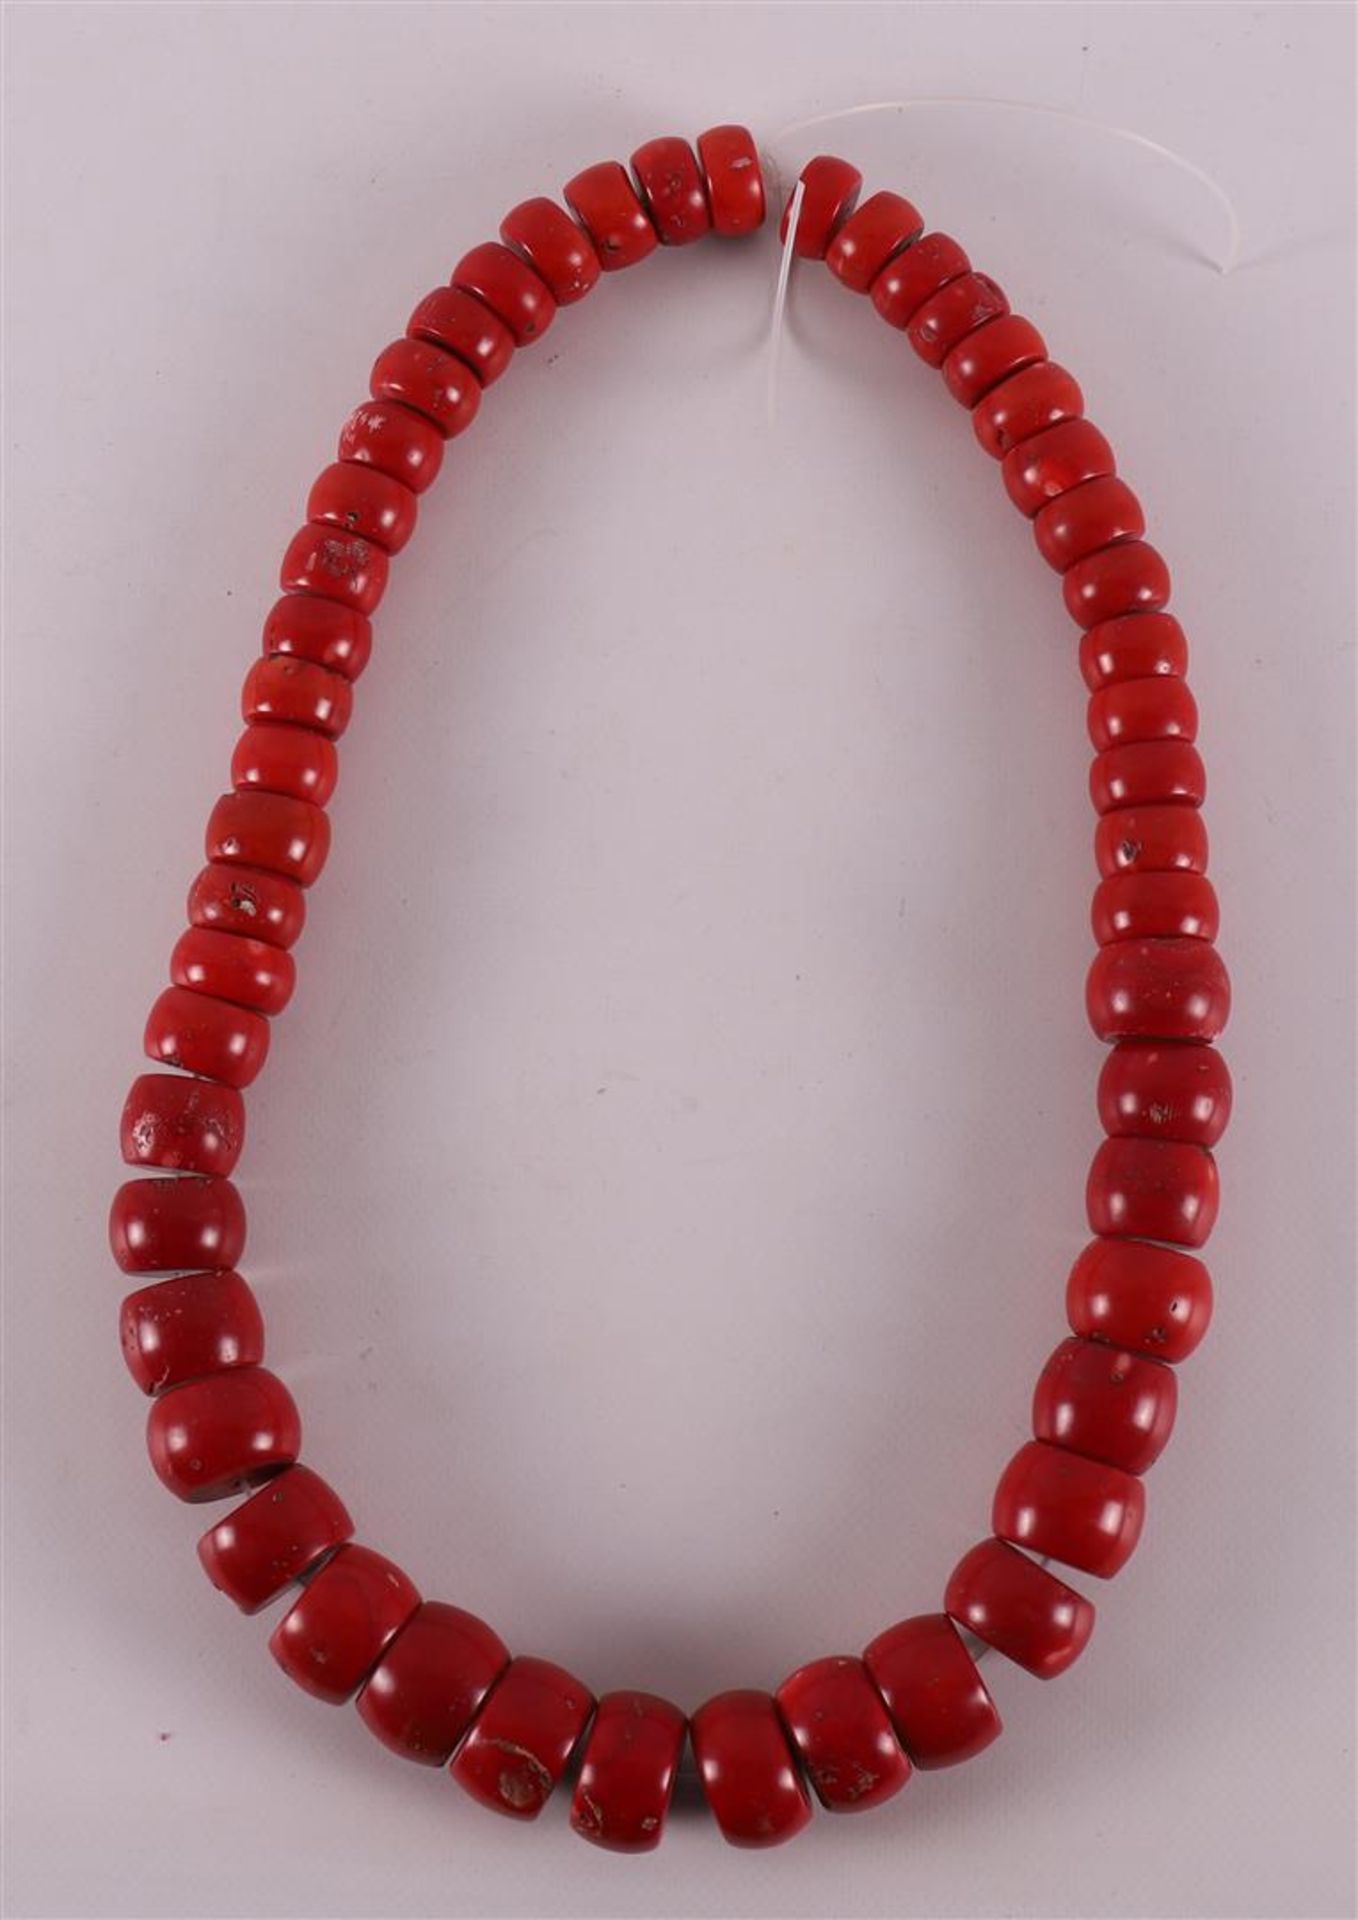 A necklace of coarse cheese-shaped red corals